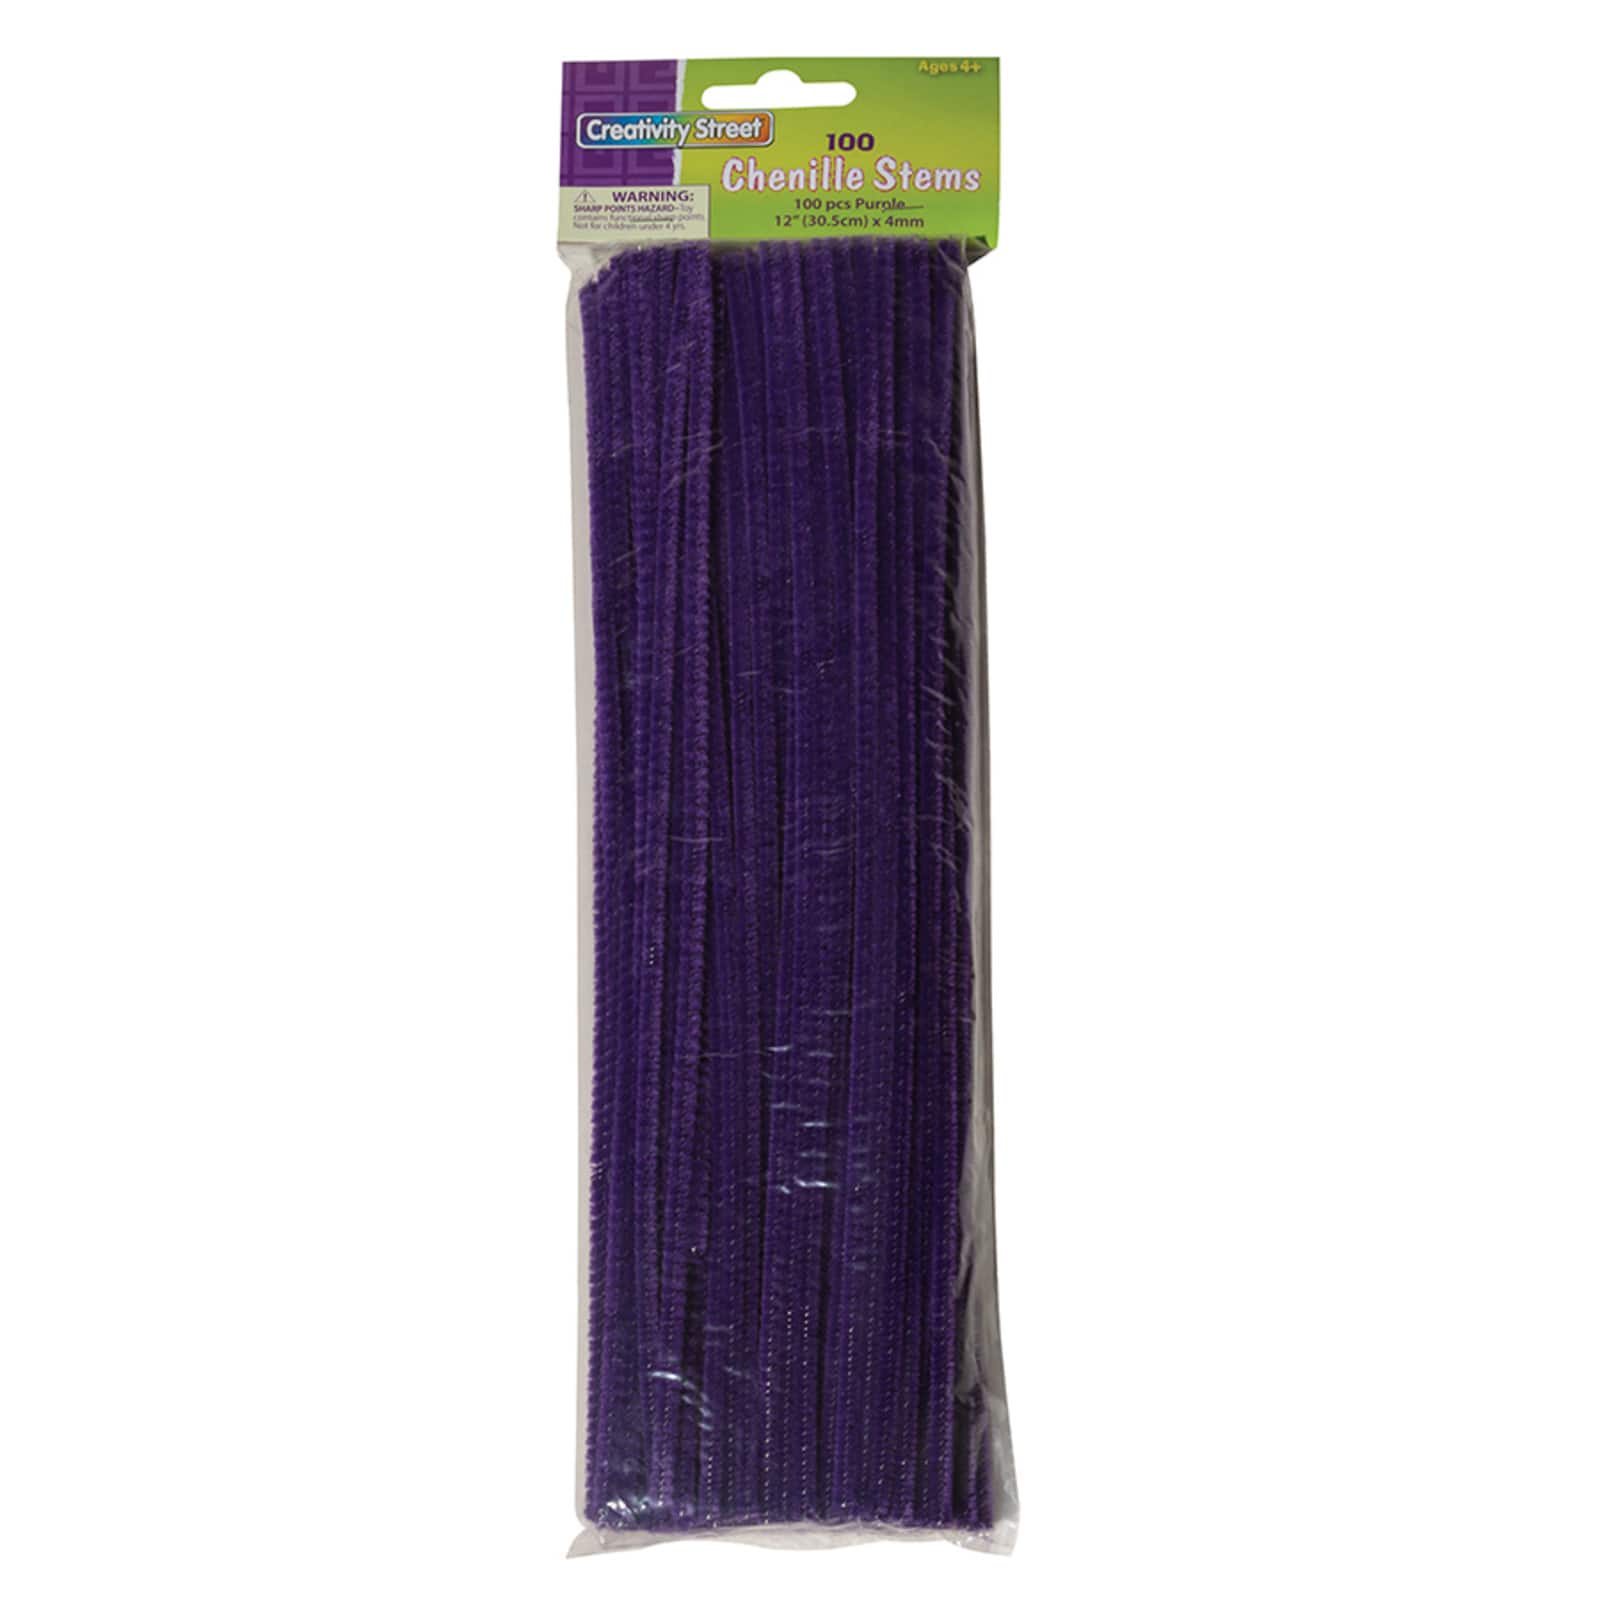 Bulk Lilac Pipe Cleaners, 12'' x 6 mm Diameter, Purple, Craft Supplies from Factory Direct Craft